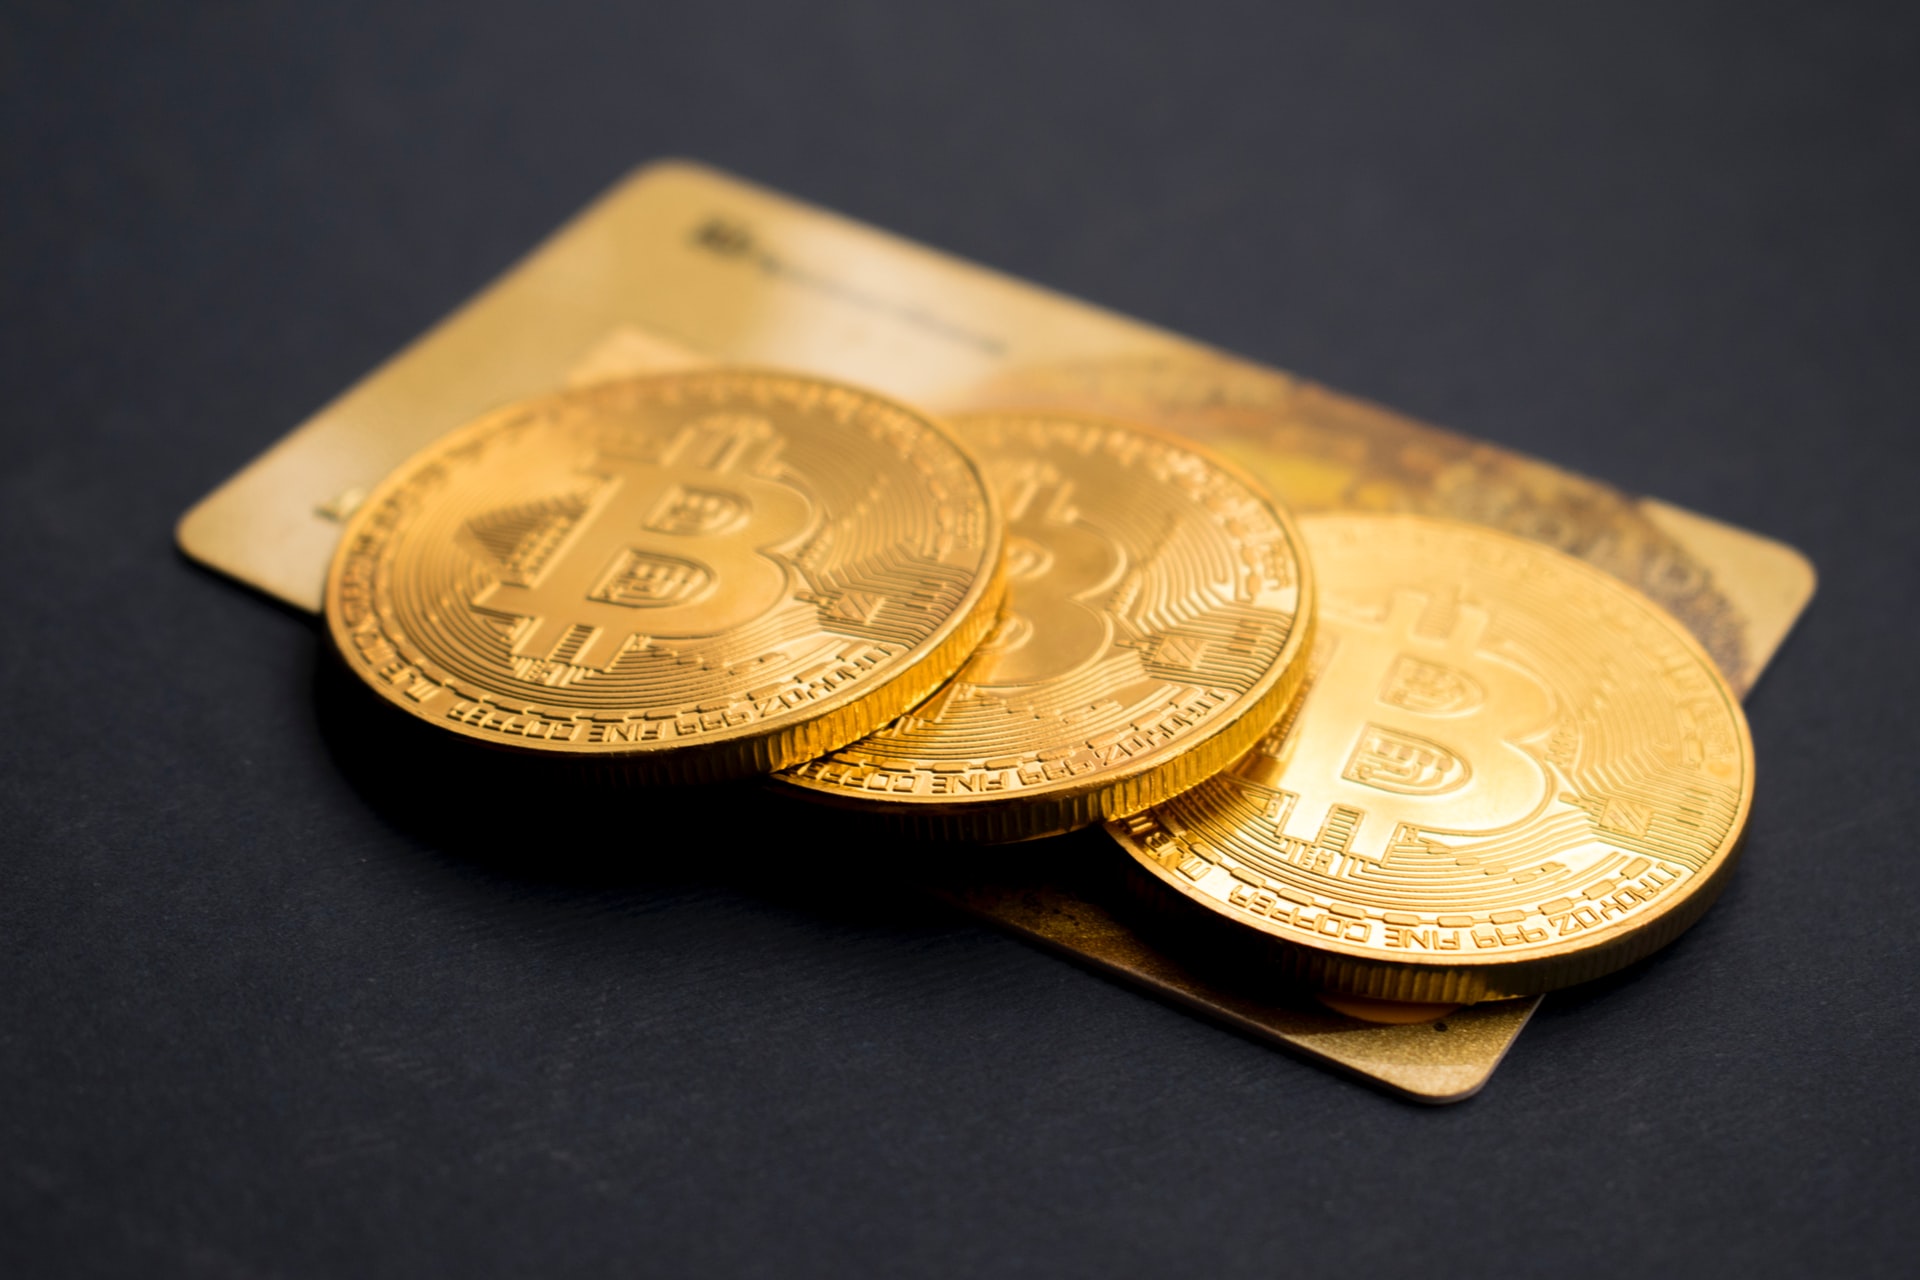 Bitcoin Breaks with Gold, but Hashrates Show a Resurgence Building